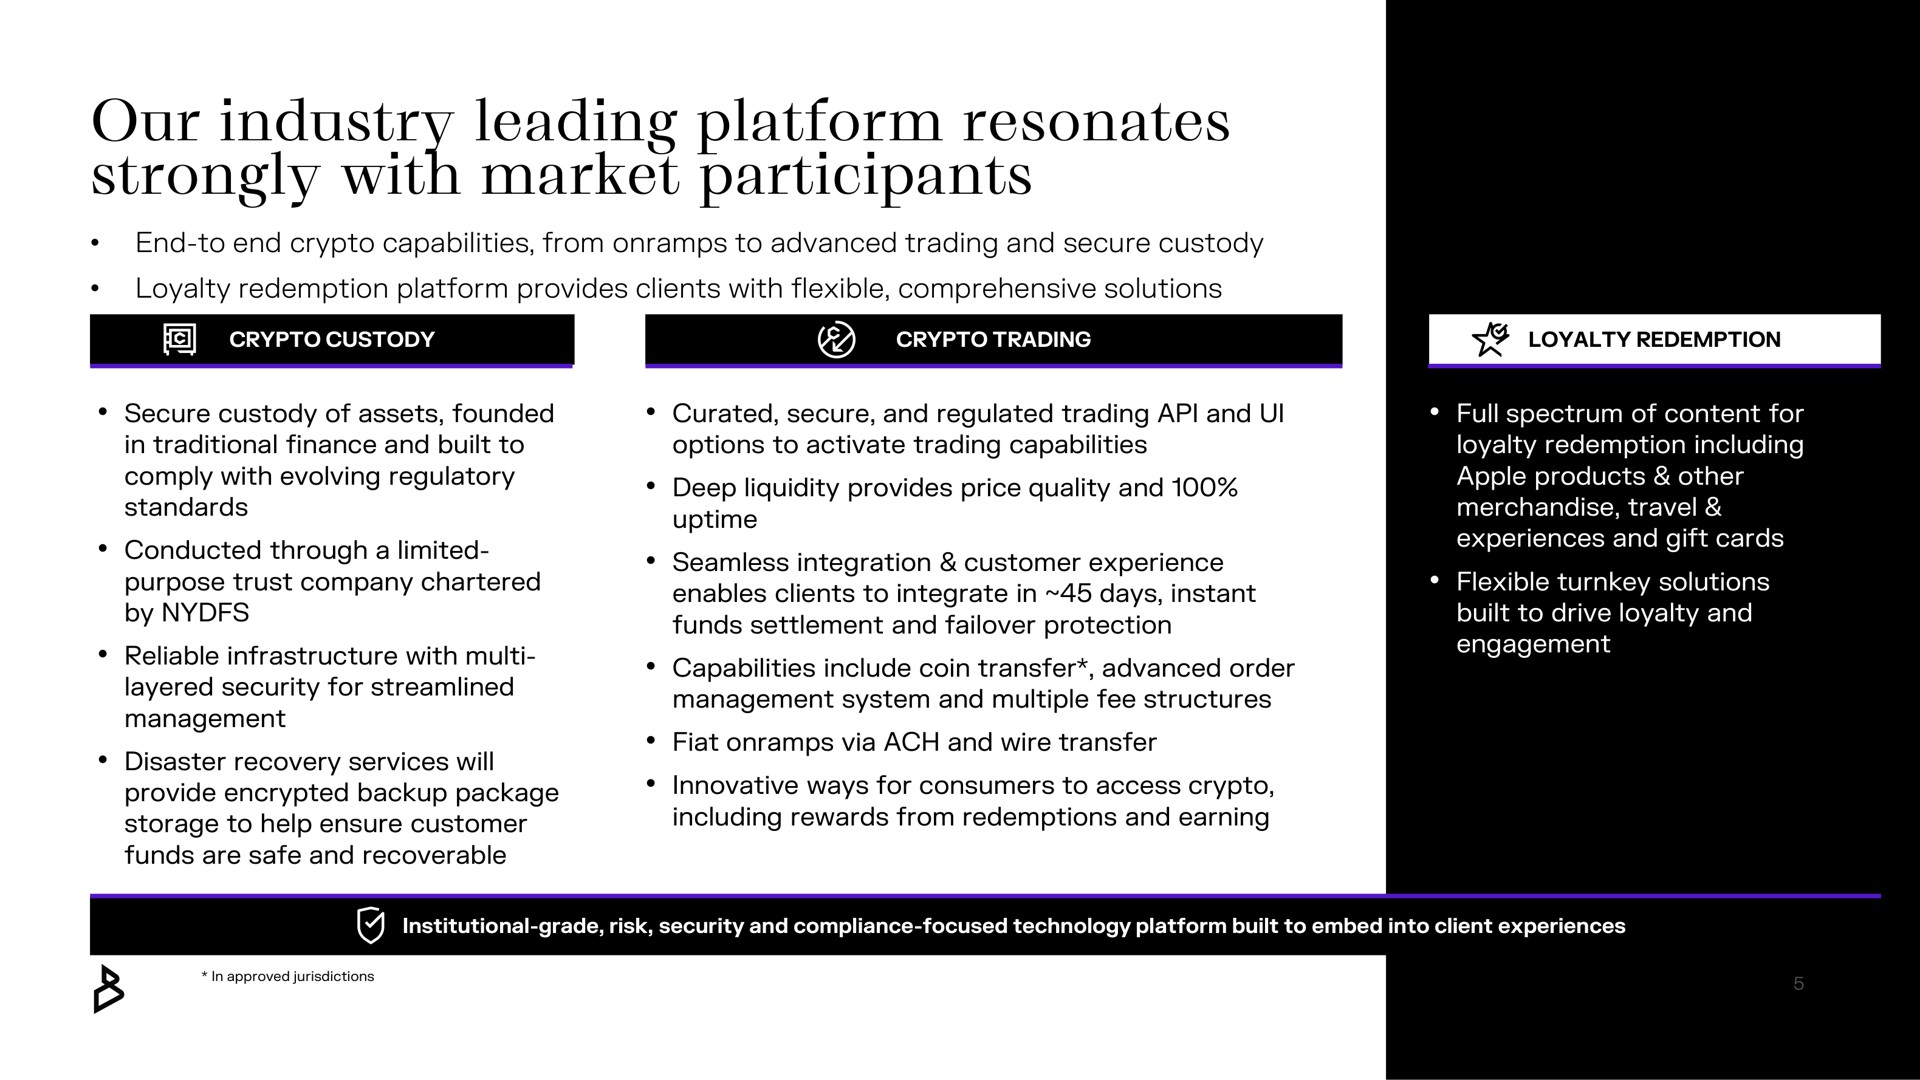 our industry leading platform resonates strongly with market participants | Bakkt